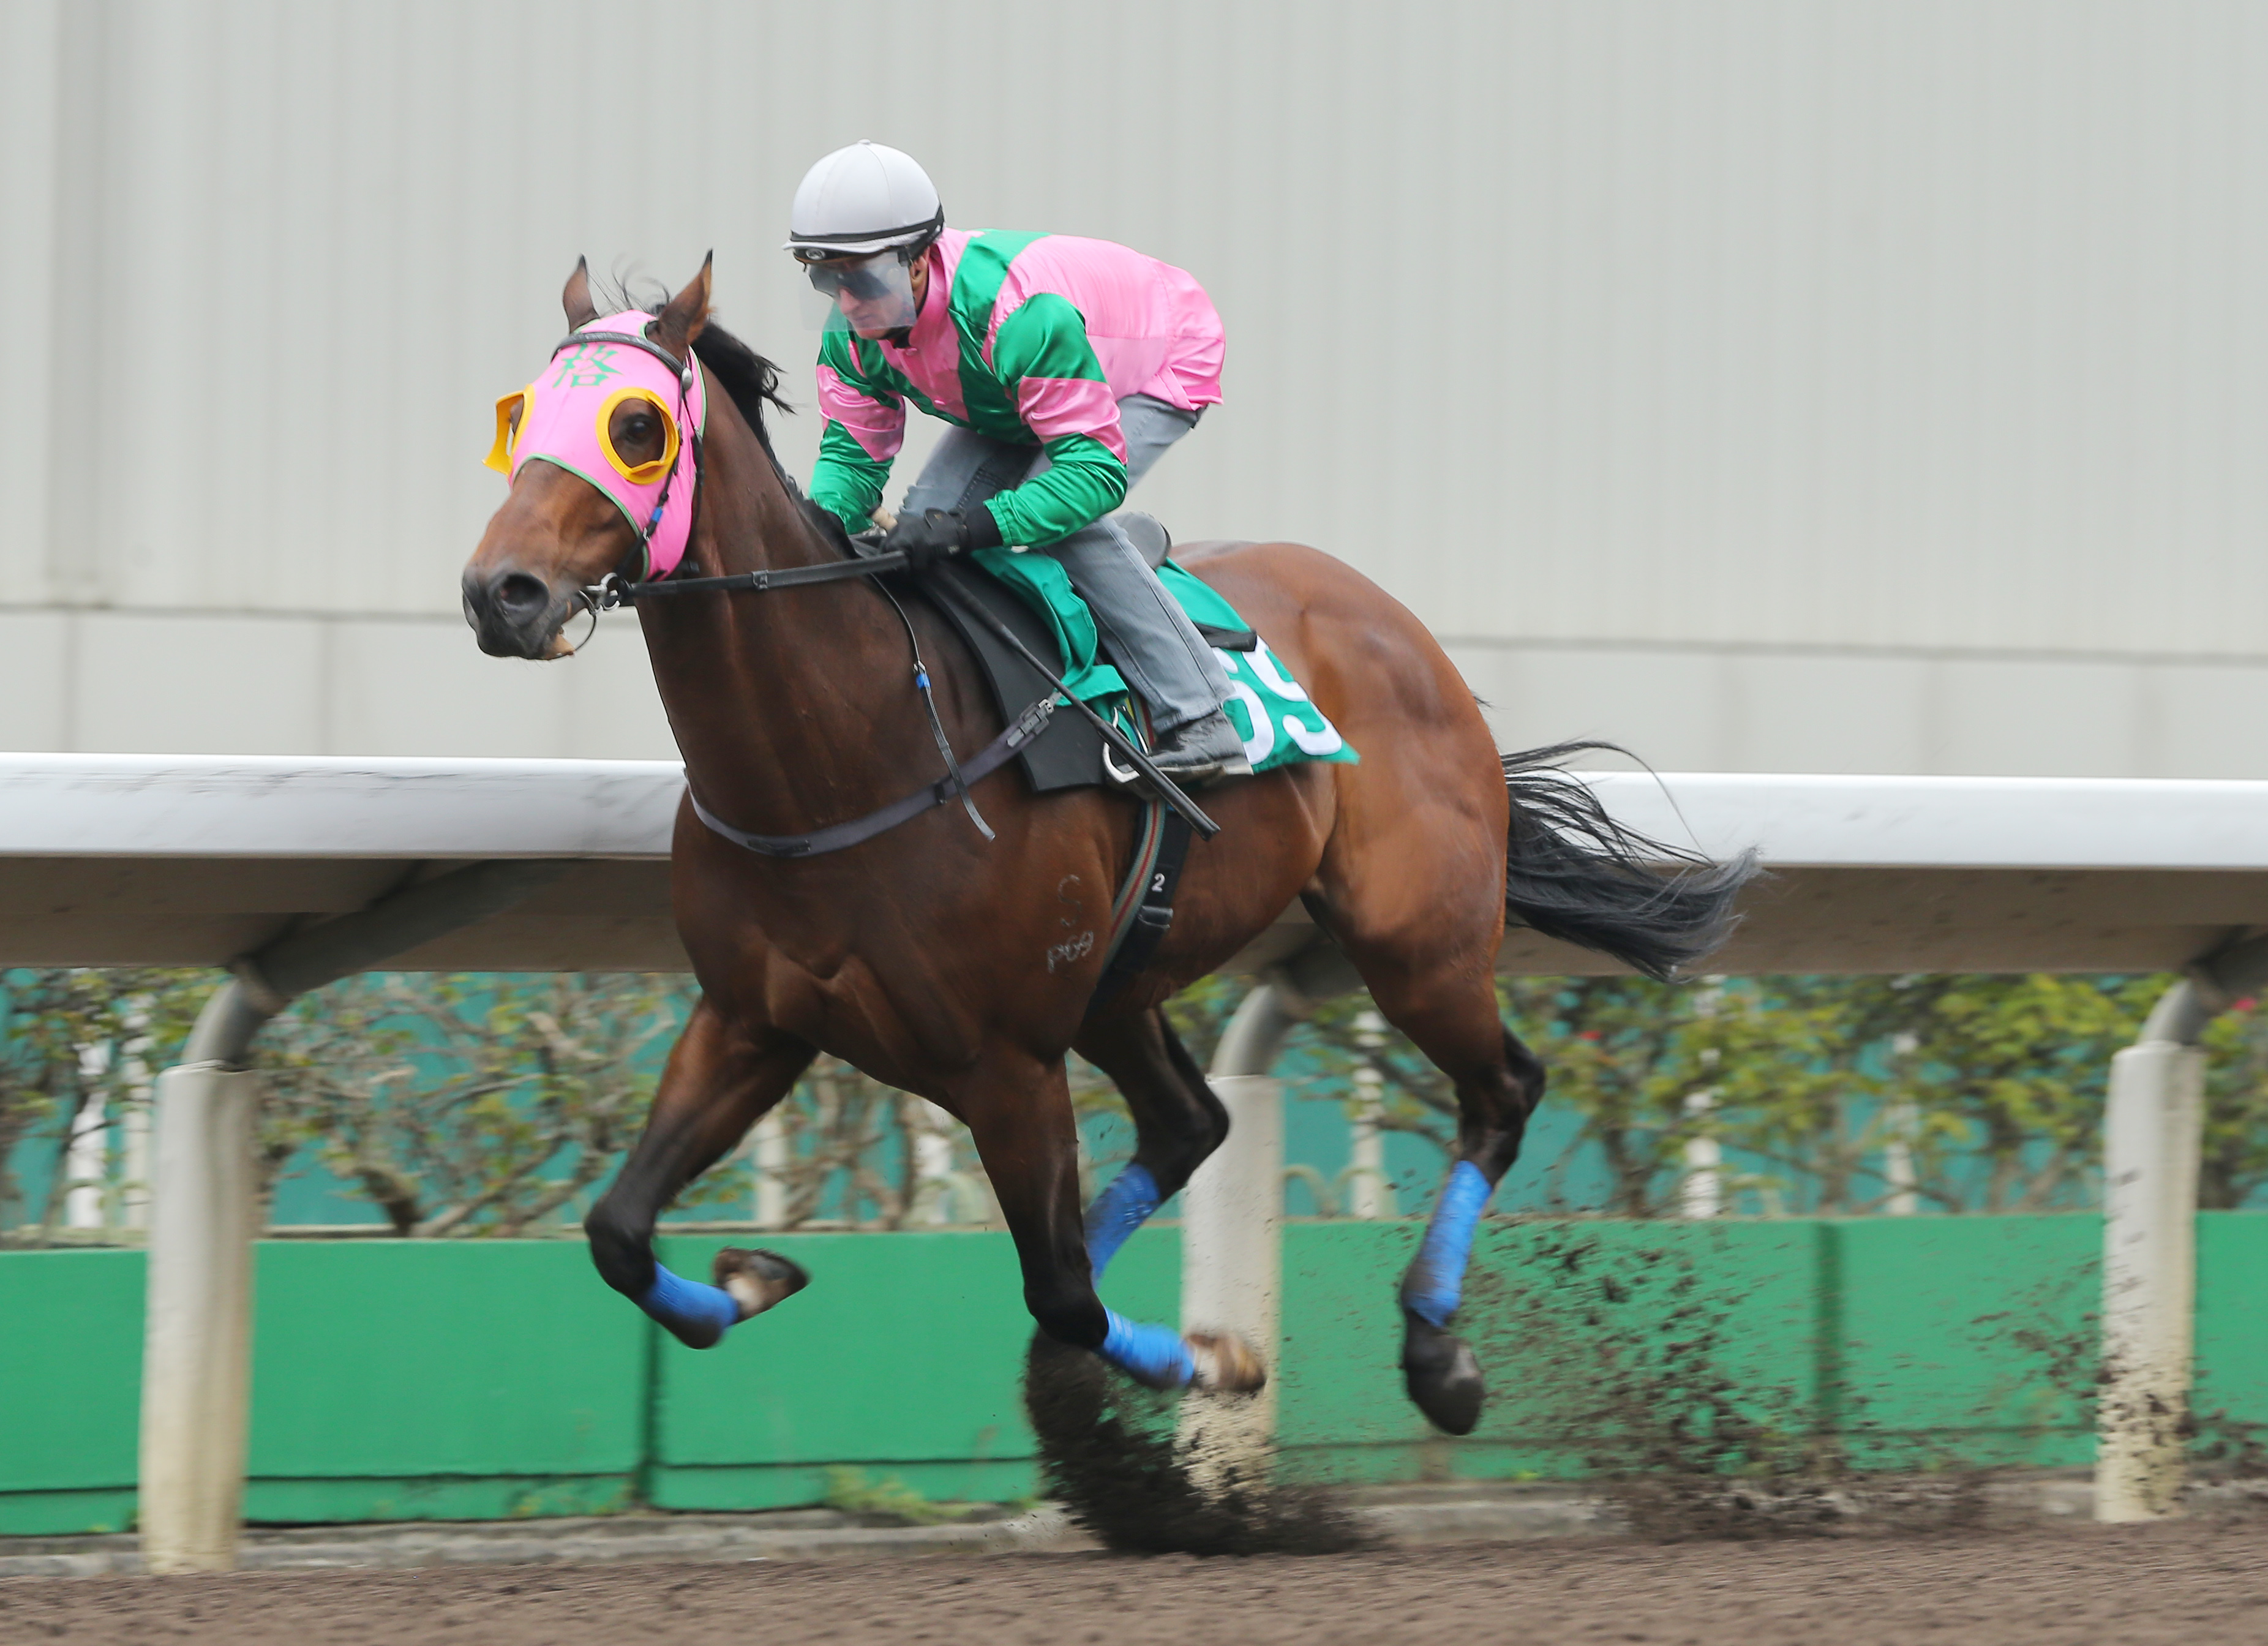 AEROVELOCITY, ridden by Zac Purton, won the barrier trial batch 7 over 1200Metres (All Weather Track) at Sha Tin. 19JAN16